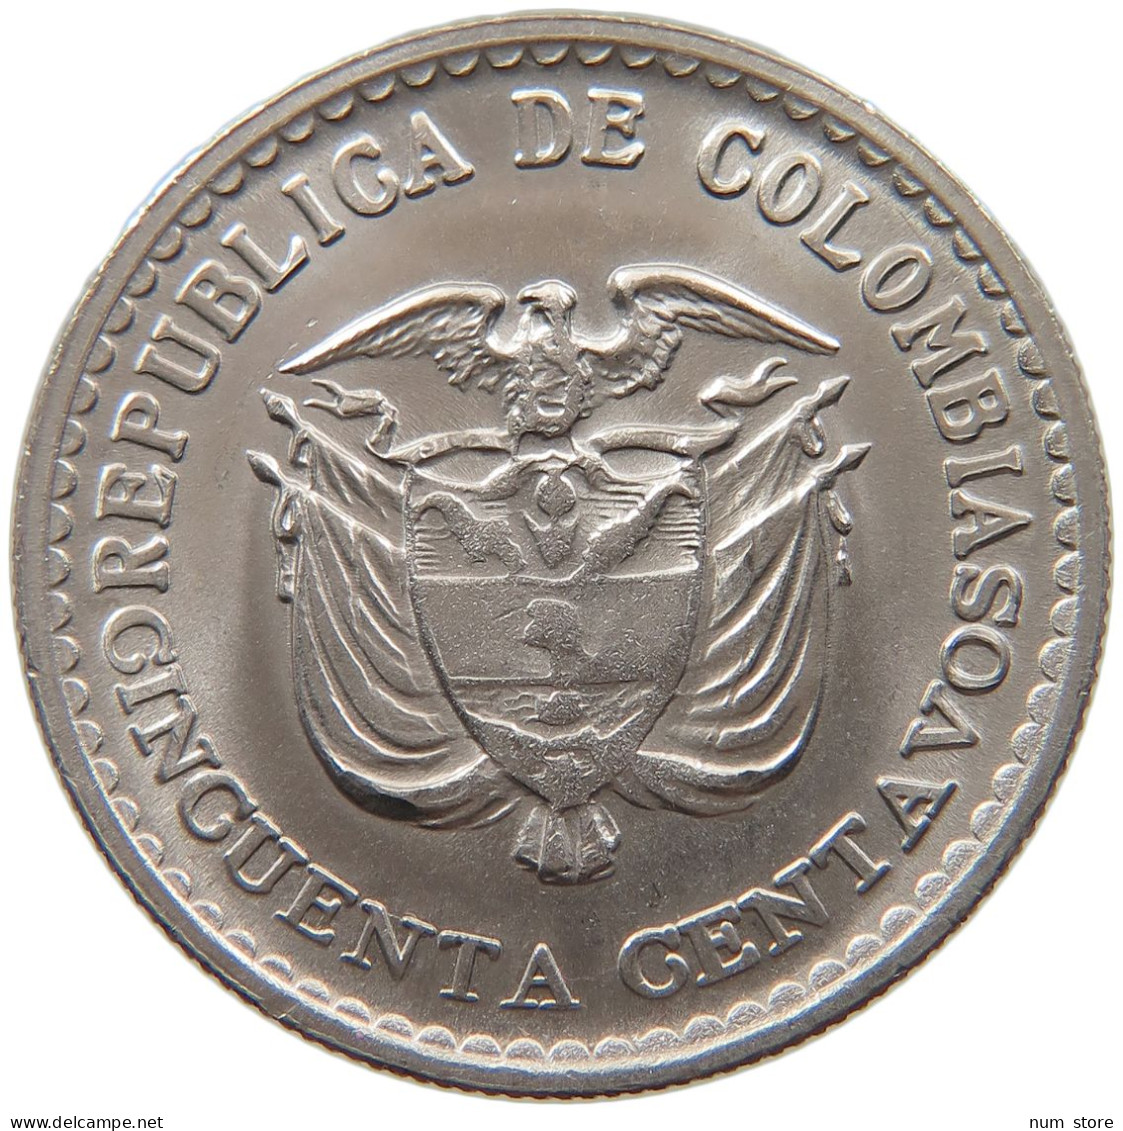 COLOMBIA 50 CENTAVOS 1965  #MA 067099 - Colombia